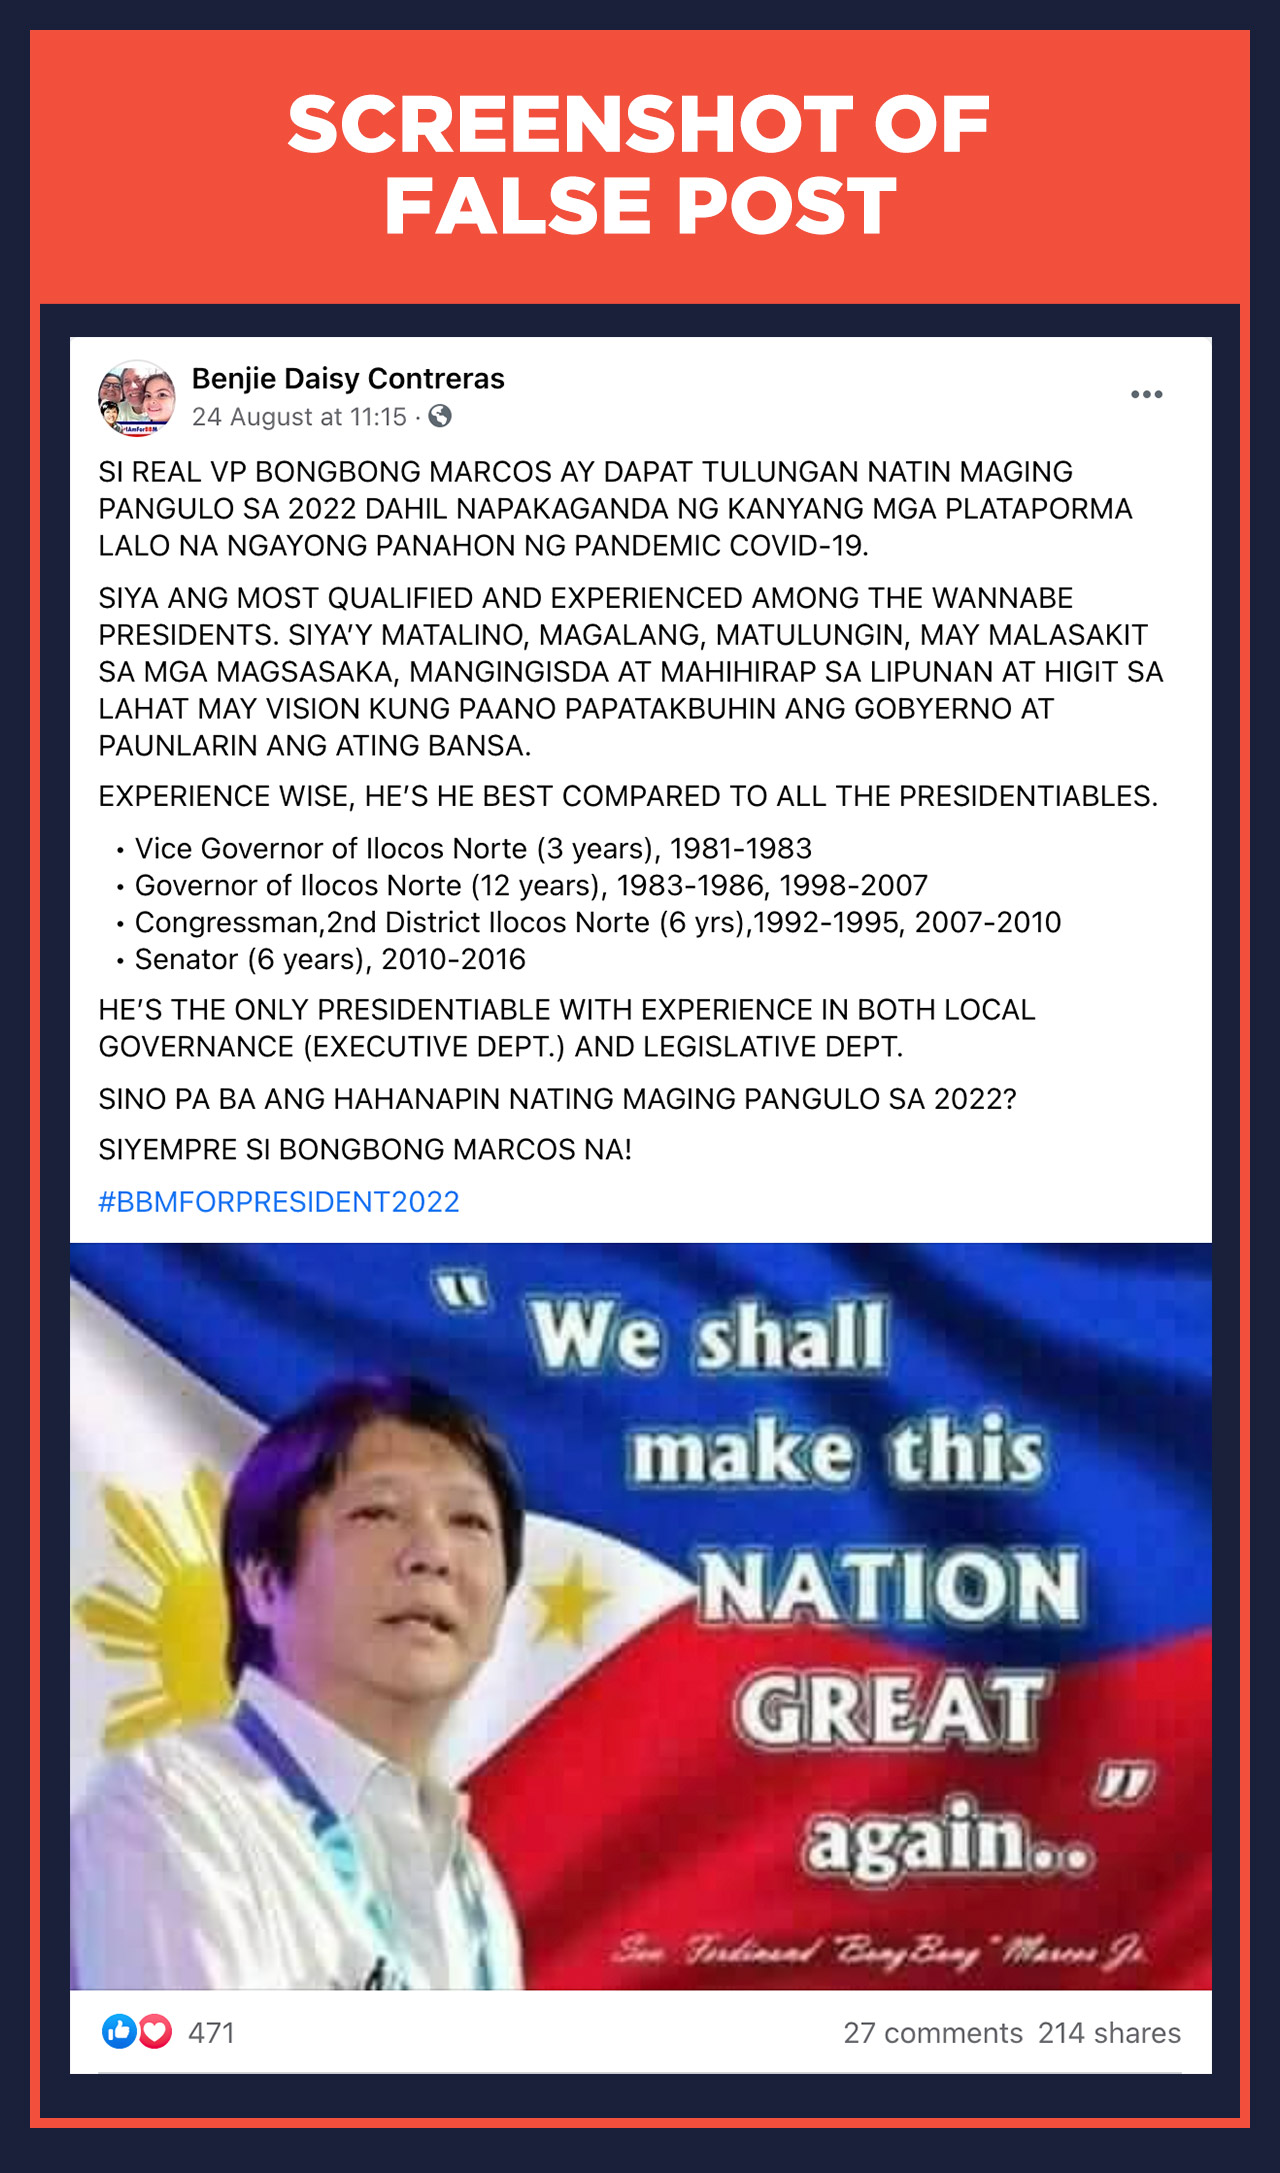 False Bongbong Marcos Is Lone Presidentiable With Local Lawmaking Experience